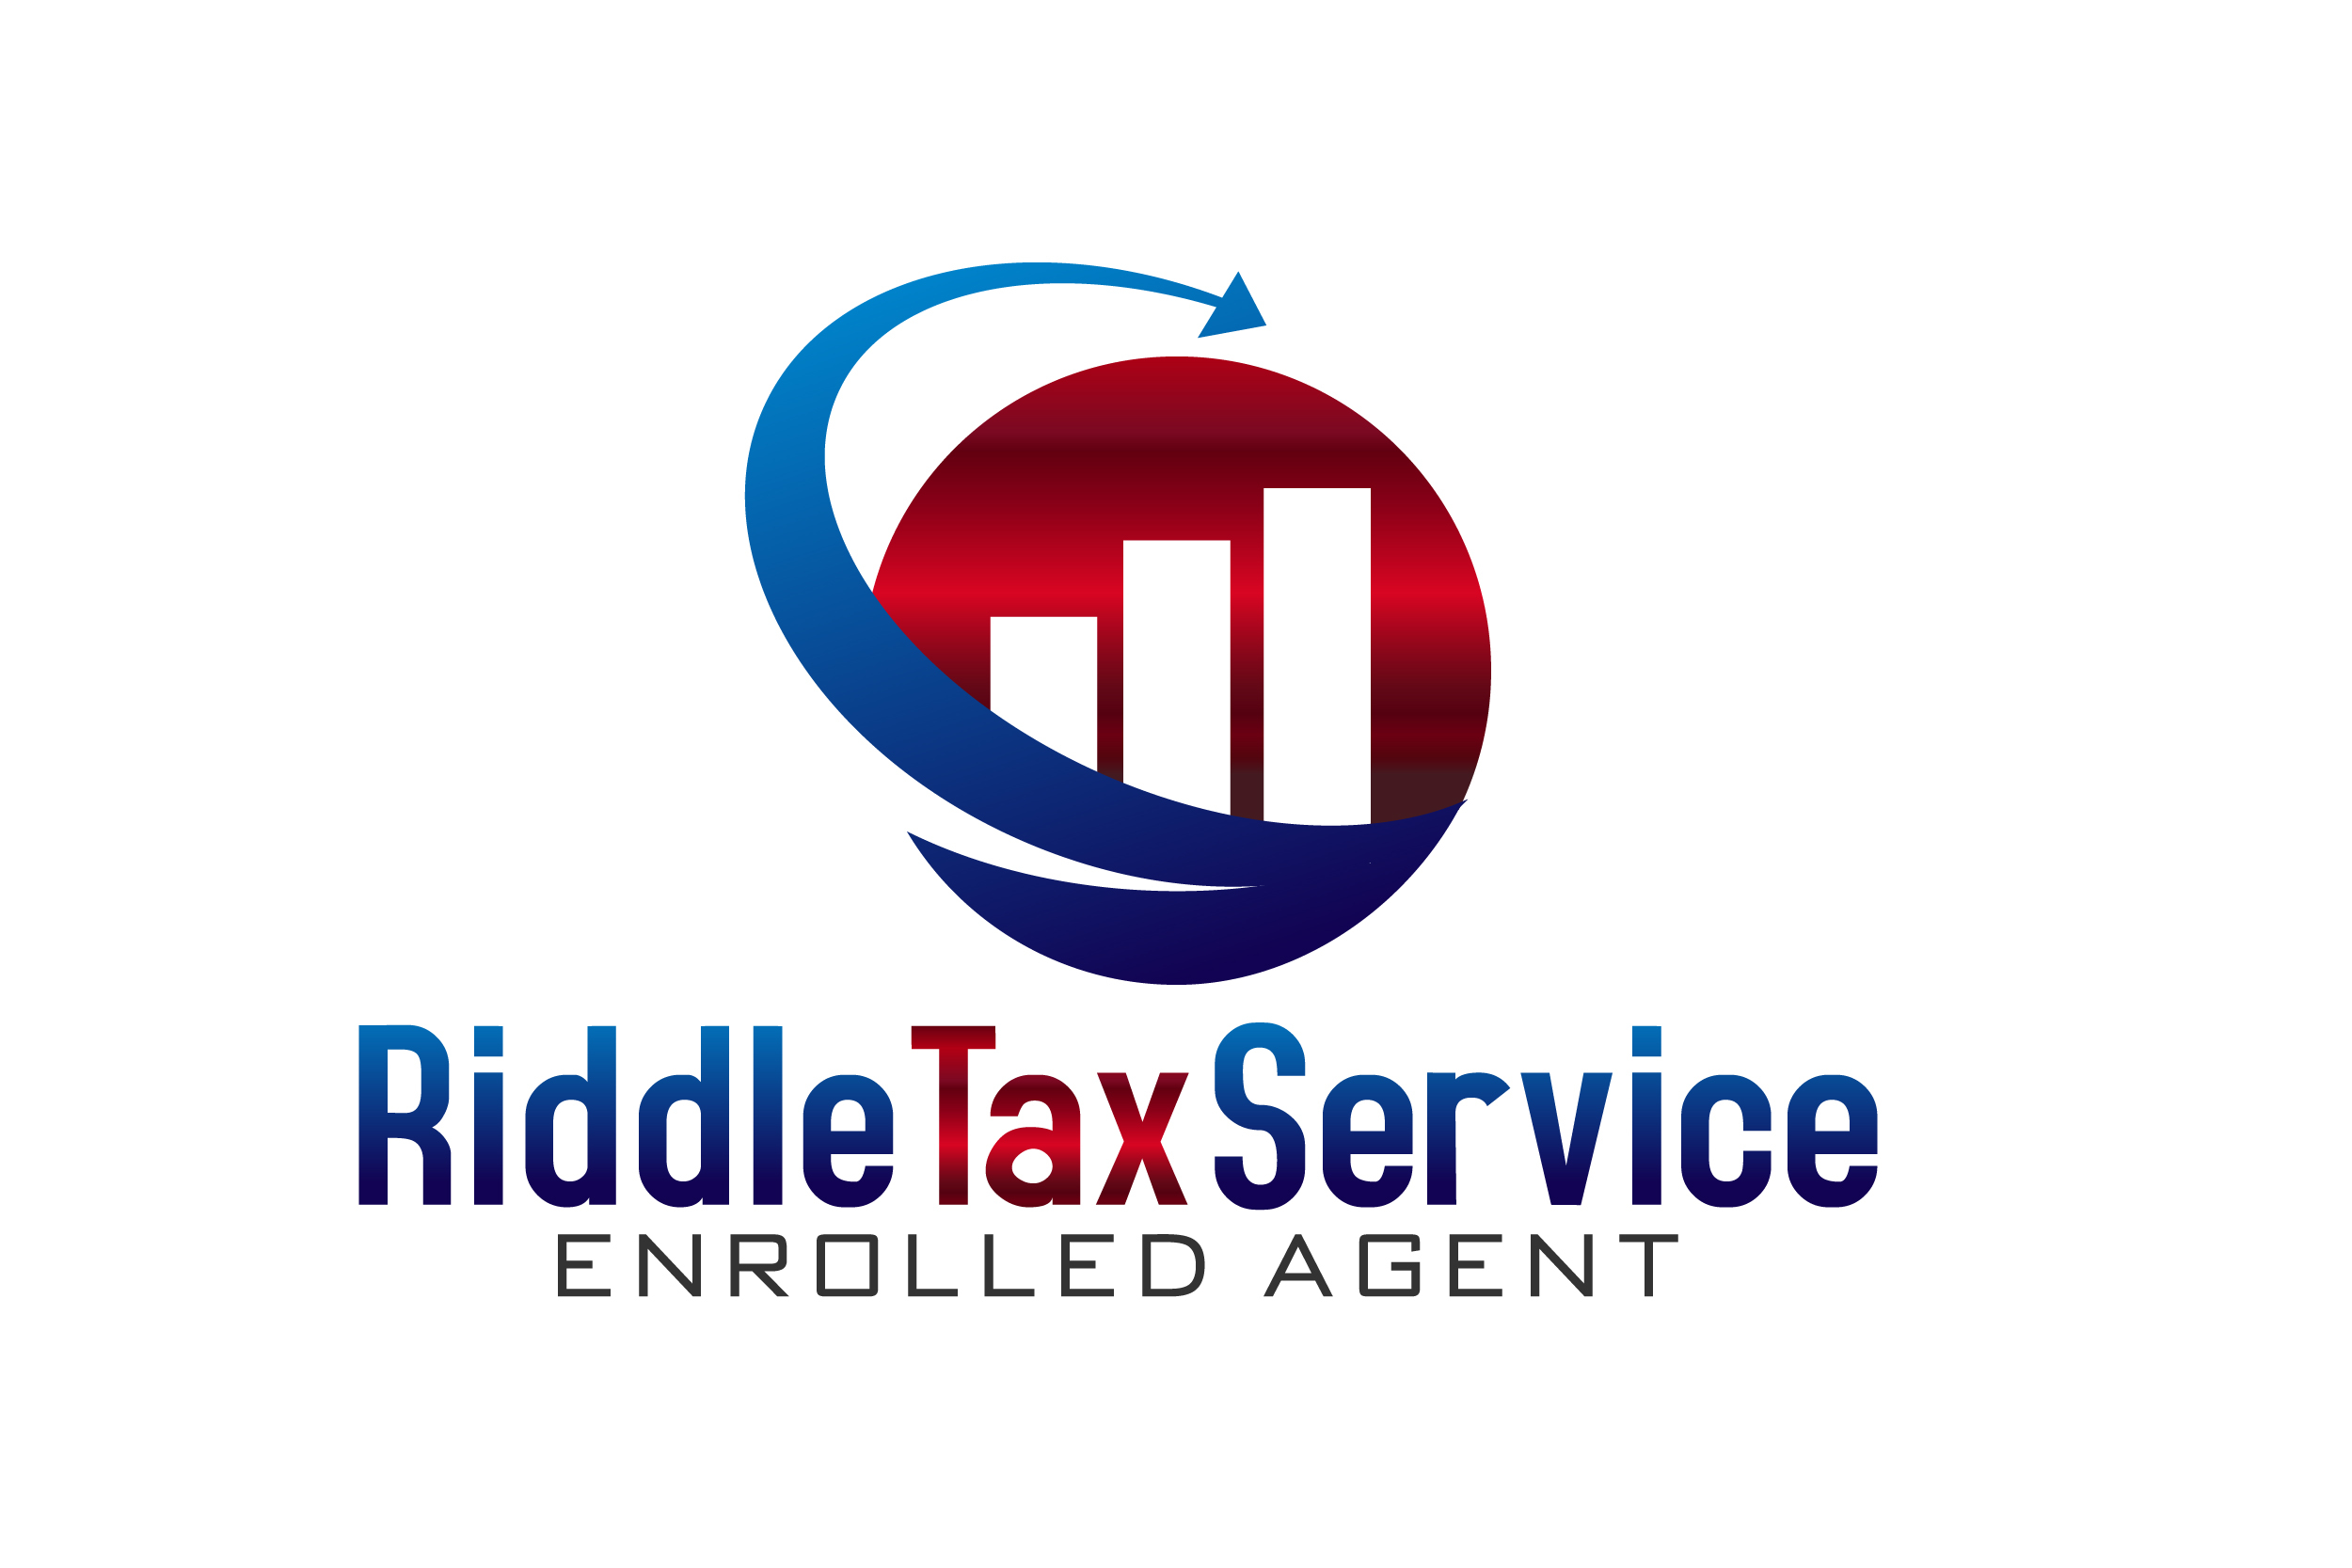 Riddle Tax Service